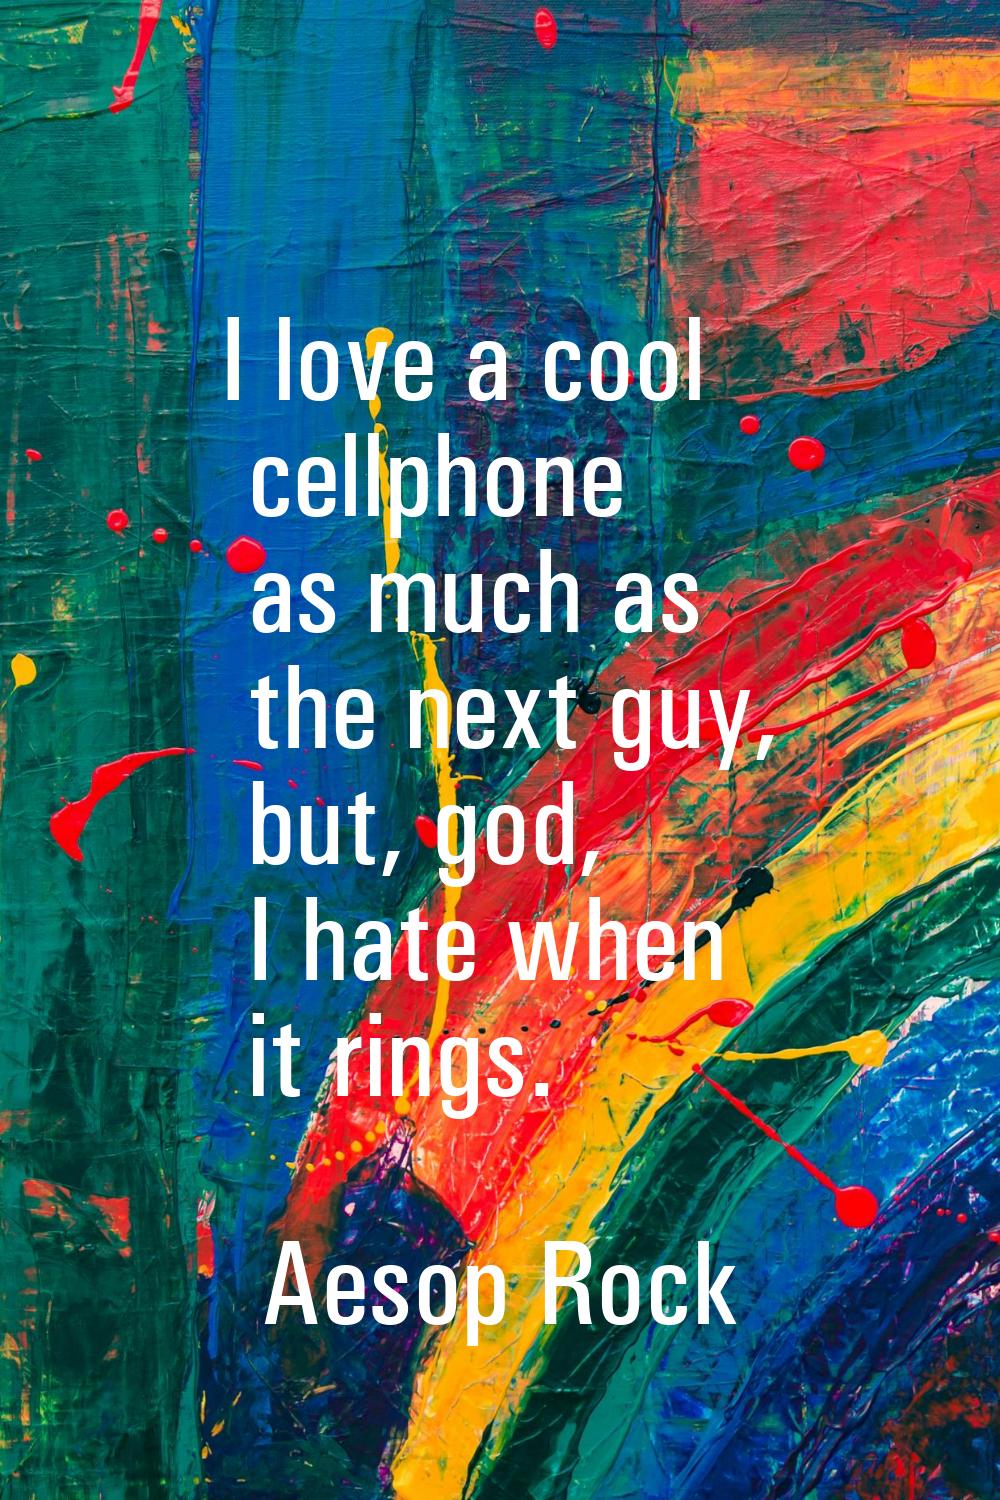 I love a cool cellphone as much as the next guy, but, god, I hate when it rings.